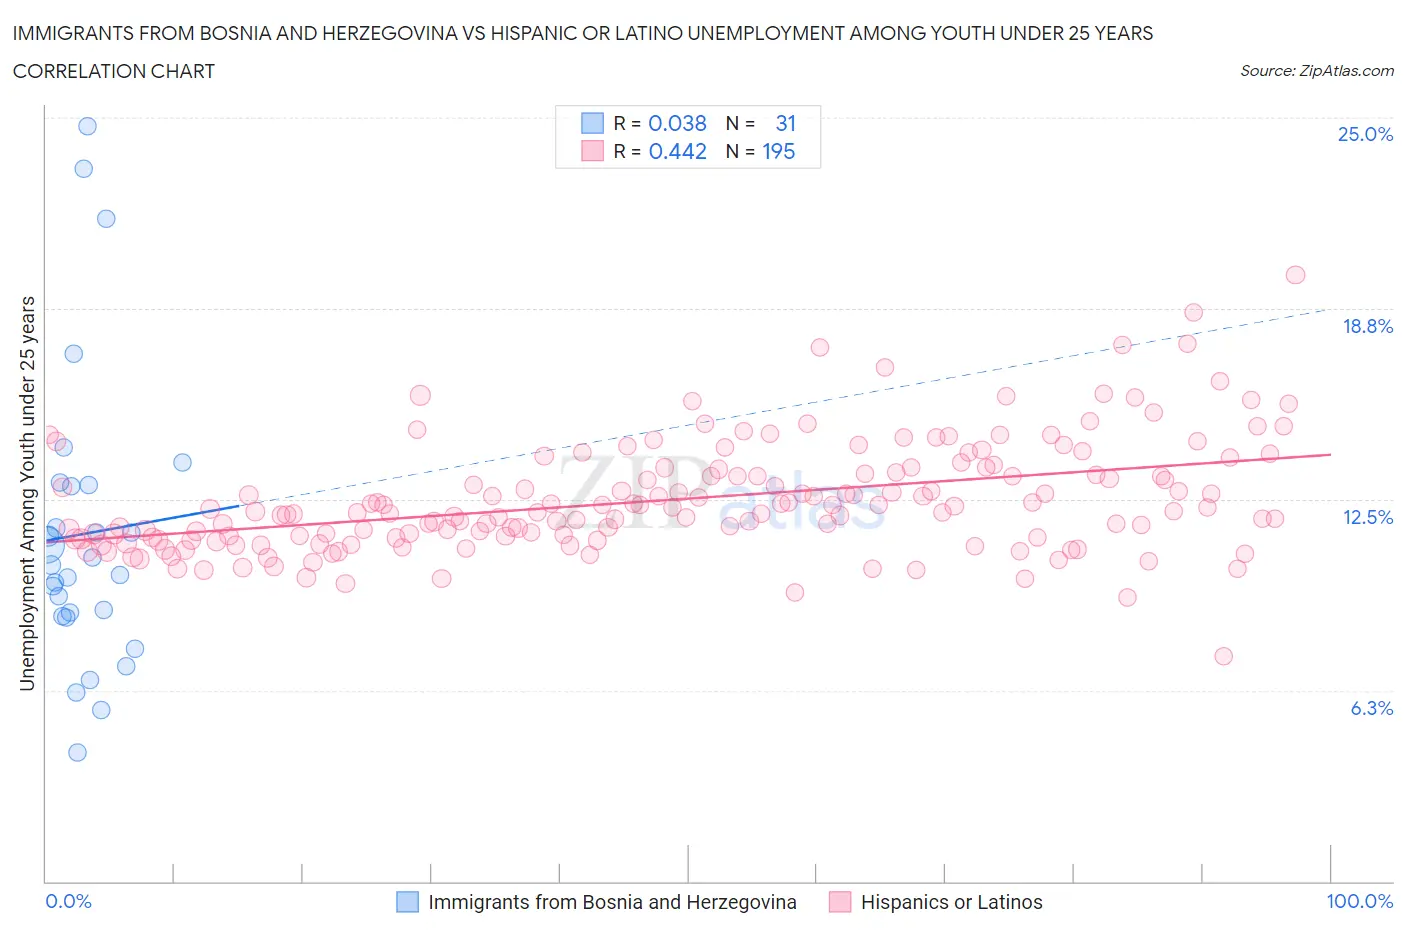 Immigrants from Bosnia and Herzegovina vs Hispanic or Latino Unemployment Among Youth under 25 years